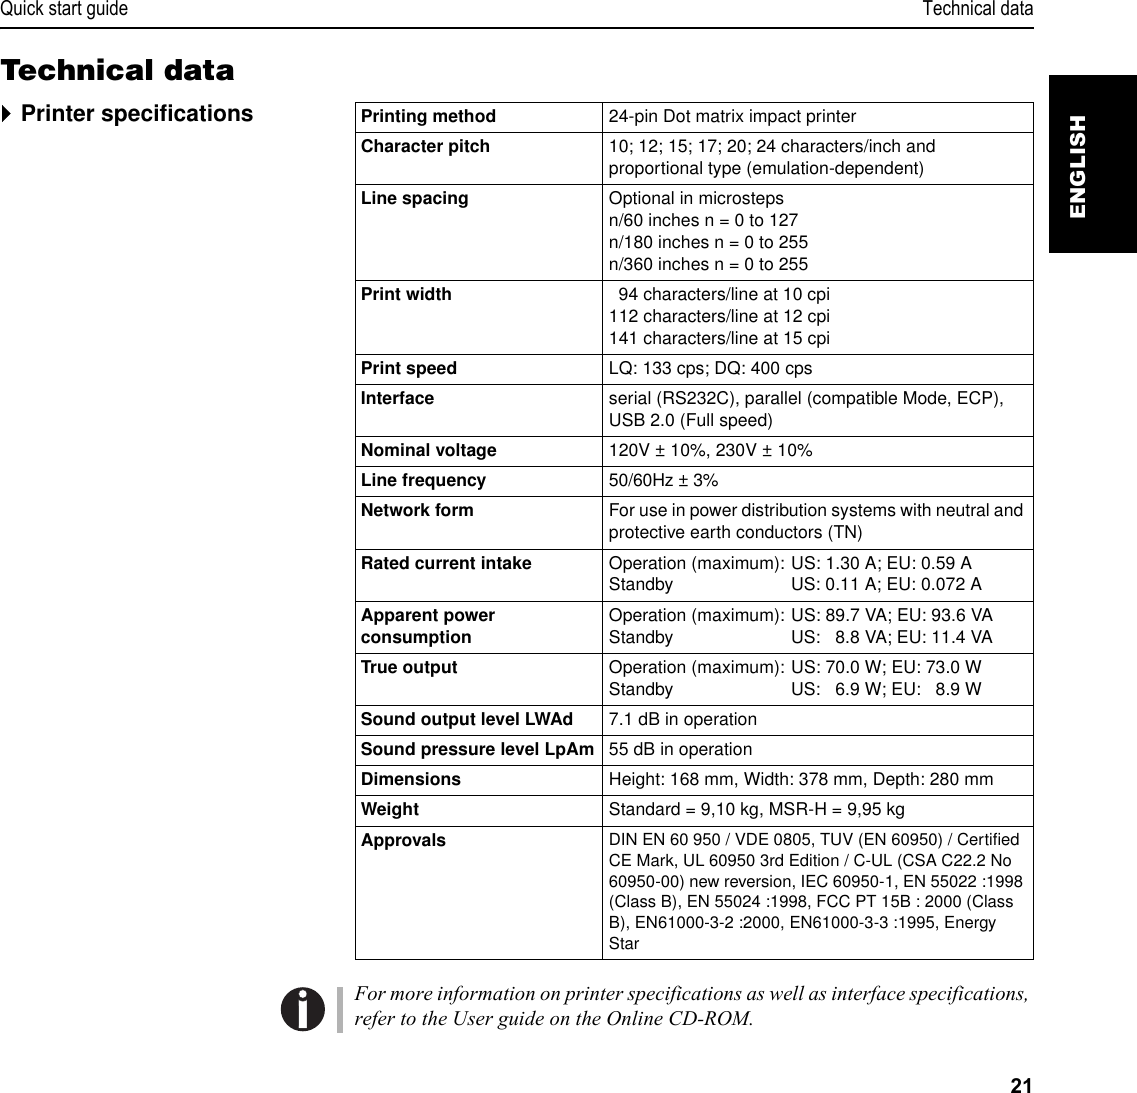 Quick start guide Technical data21ENGLISHTechnical data`Printer specificationsFor more information on printer specifications as well as interface specifications, refer to the User guide on the Online CD-ROM.Printing method  24-pin Dot matrix impact printerCharacter pitch 10; 12; 15; 17; 20; 24 characters/inch and proportional type (emulation-dependent) Line spacing Optional in microsteps n/60 inches n = 0 to 127 n/180 inches n = 0 to 255 n/360 inches n = 0 to 255 Print width 194 characters/line at 10 cpi112 characters/line at 12 cpi141 characters/line at 15 cpiPrint speed LQ: 133 cps; DQ: 400 cpsInterface serial (RS232C), parallel (compatible Mode, ECP), USB 2.0 (Full speed)Nominal voltage 120V ± 10%, 230V ± 10%Line frequency 50/60Hz ± 3% Network form For use in power distribution systems with neutral and protective earth conductors (TN) Rated current intake Operation (maximum): US: 1.30 A; EU: 0.59 AStandby  US: 0.11 A; EU: 0.072 AApparent power consumption Operation (maximum): US: 89.7 VA; EU: 93.6 VAStandby  US: 88.8 VA; EU: 11.4 VATrue output Operation (maximum): US: 70.0 W; EU: 73.0 WStandby  US: 76.9 W; EU: 78.9 WSound output level LWAd 7.1 dB in operationSound pressure level LpAm 55 dB in operationDimensions Height: 168 mm, Width: 378 mm, Depth: 280 mmWeight Standard = 9,10 kg, MSR-H = 9,95 kgApprovals DIN EN 60 950 / VDE 0805, TUV (EN 60950) / Certified CE Mark, UL 60950 3rd Edition / C-UL (CSA C22.2 No 60950-00) new reversion, IEC 60950-1, EN 55022 :1998 (Class B), EN 55024 :1998, FCC PT 15B : 2000 (Class B), EN61000-3-2 :2000, EN61000-3-3 :1995, Energy Star